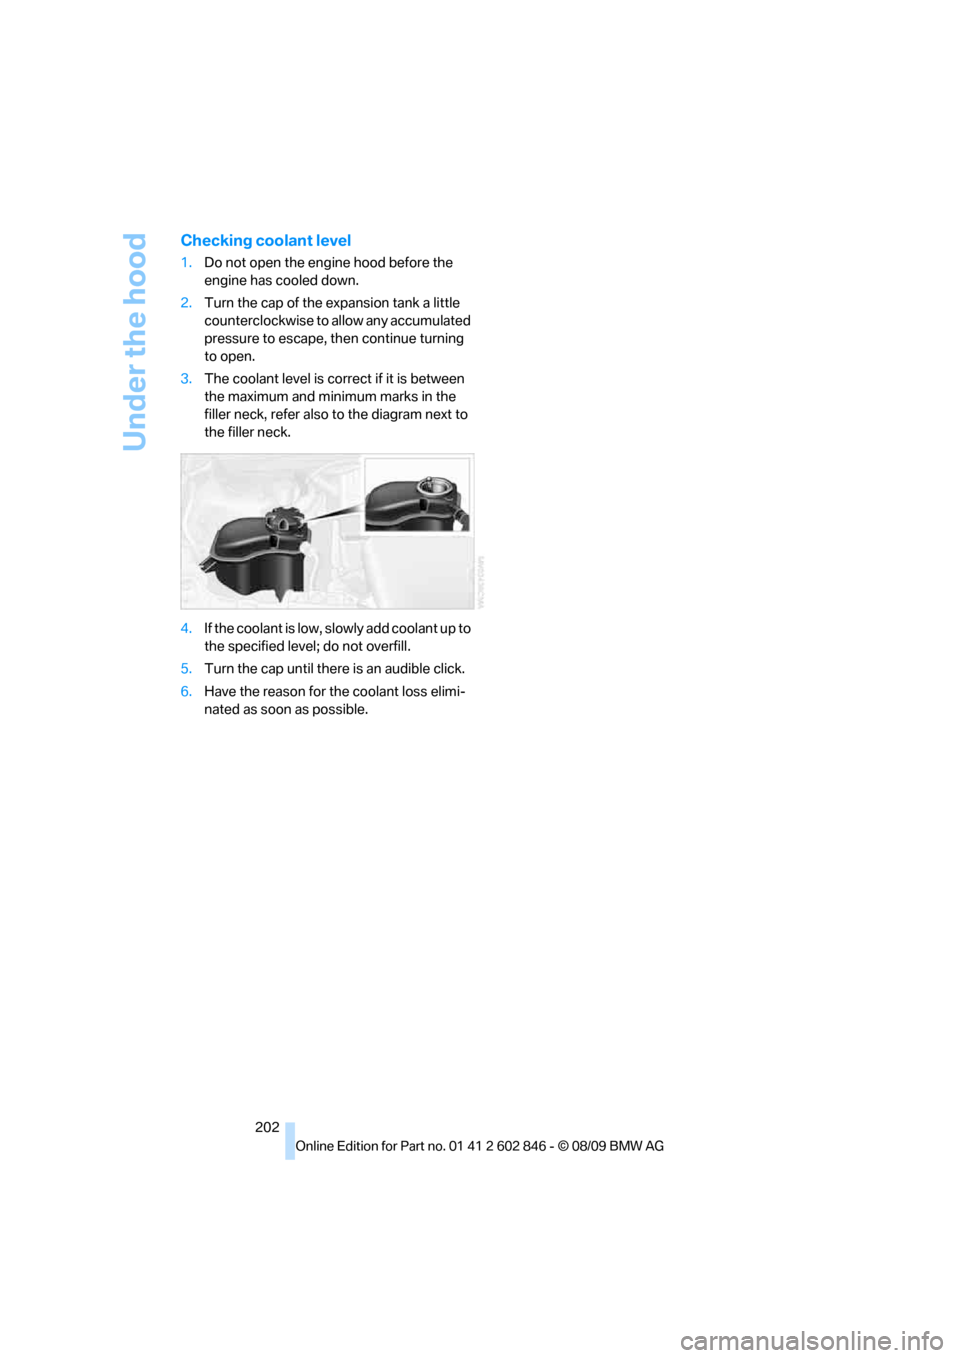 BMW 128I 2010 E81 Owners Manual Under the hood
202
Checking coolant level
1.Do not open the engine hood before the 
engine has cooled down.
2.Turn the cap of the expansion tank a little 
counterclockwise to allow any accumulated 
pr